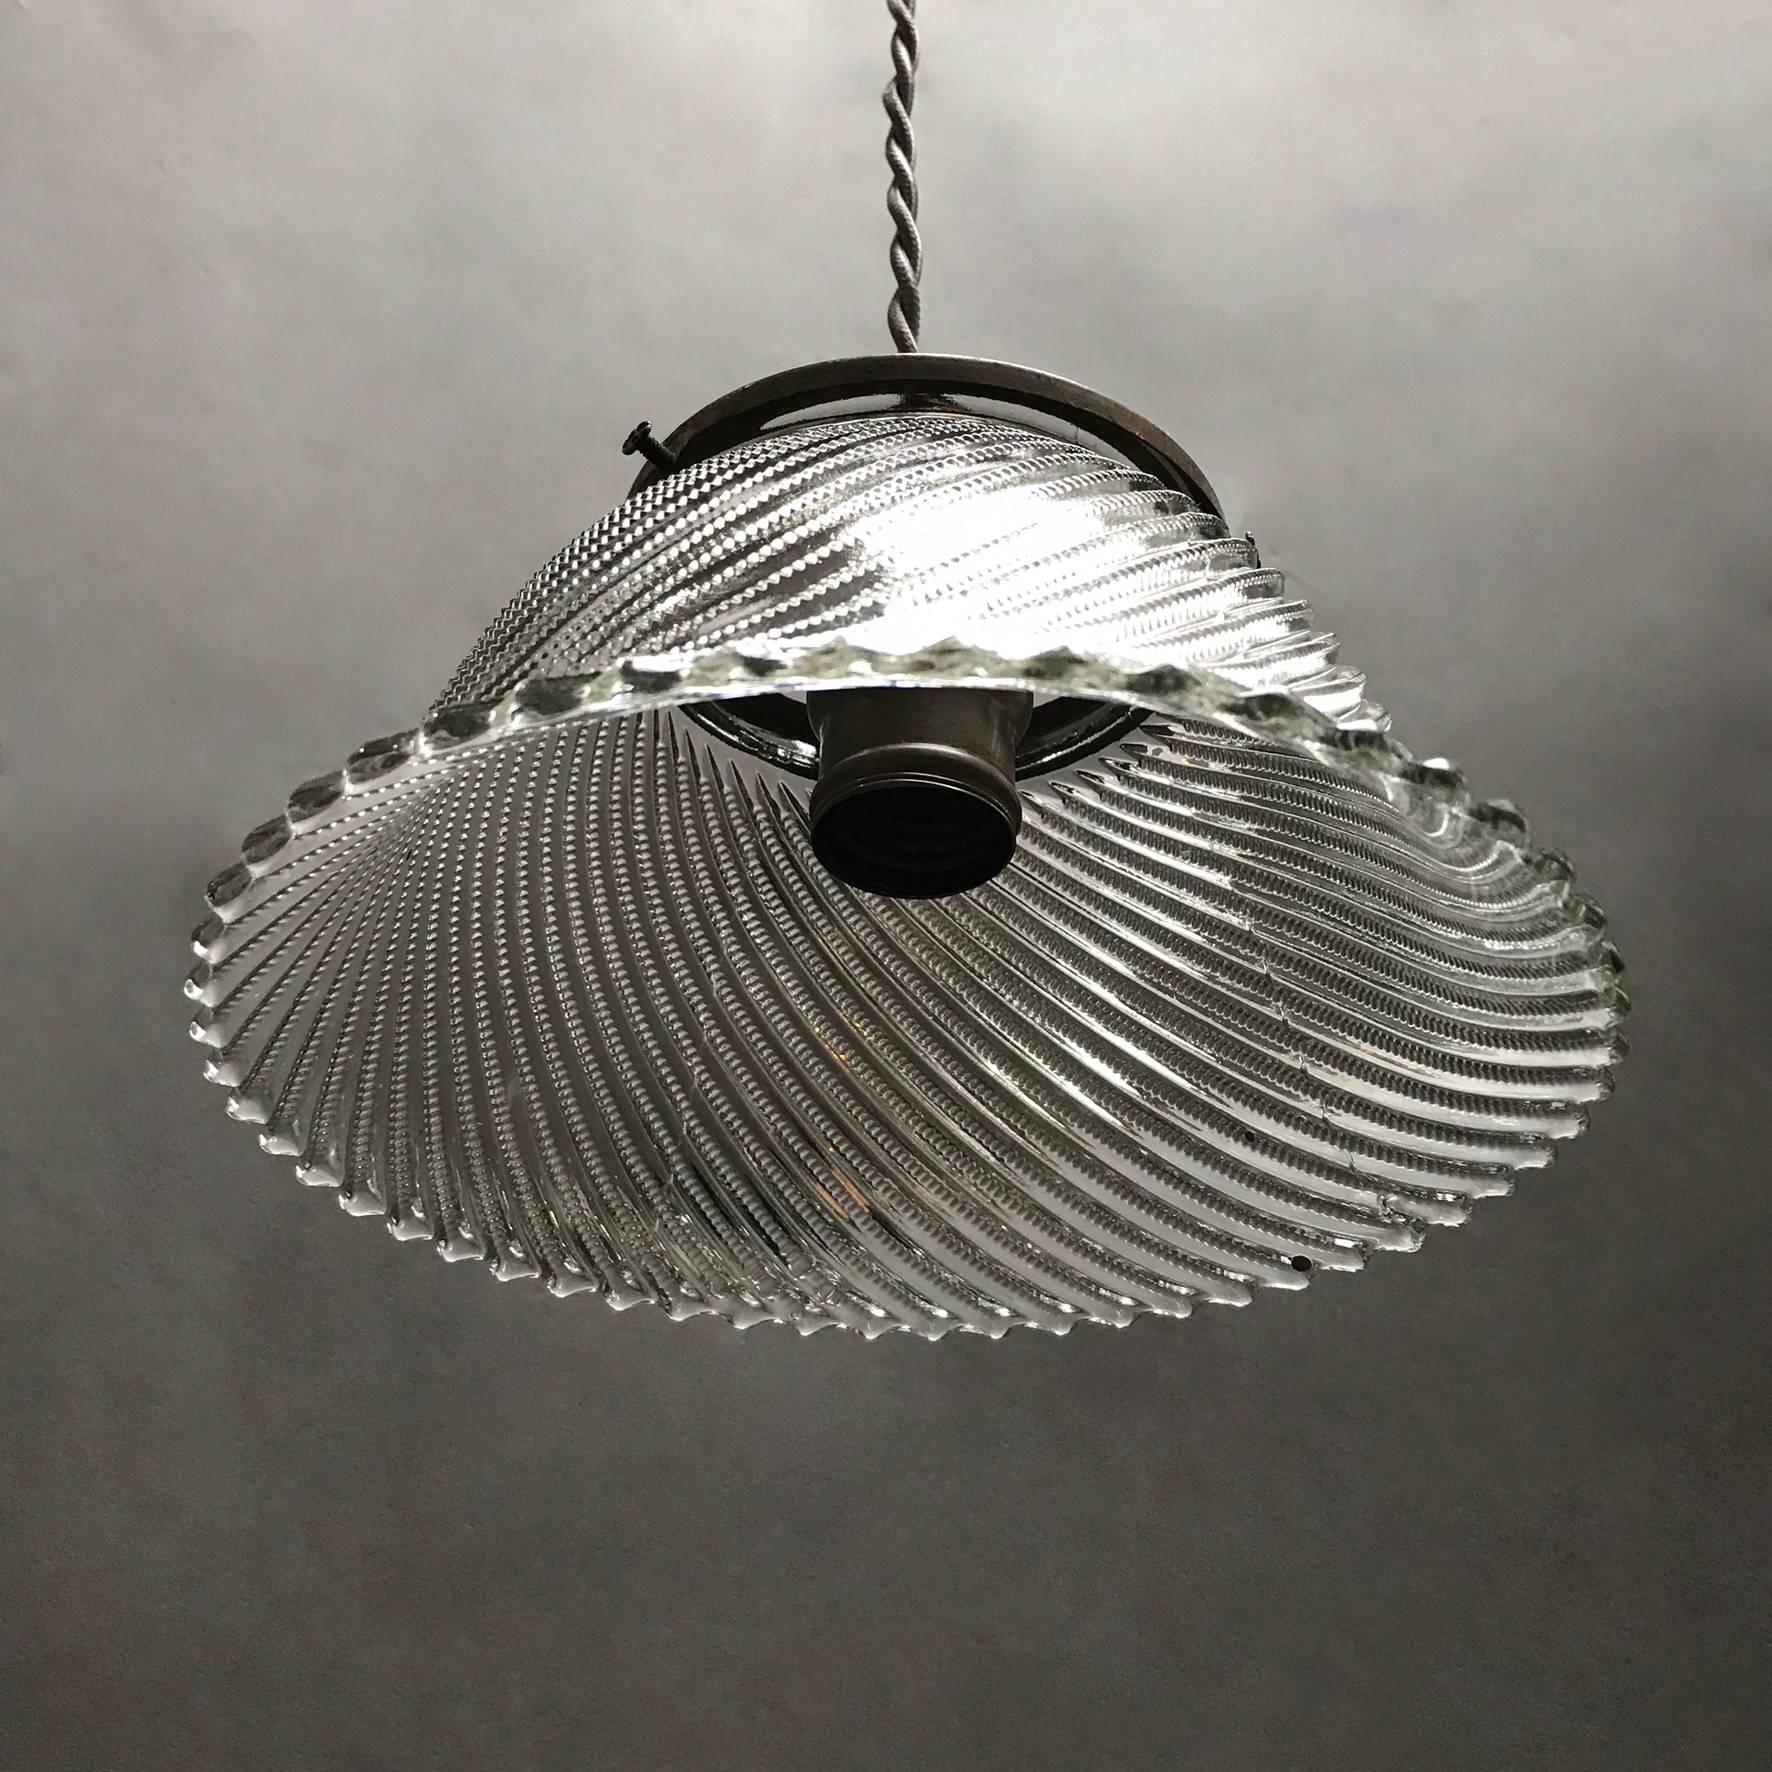 Early 20th Century Industrial Swirled Holophane Glass Bell Pendant Light